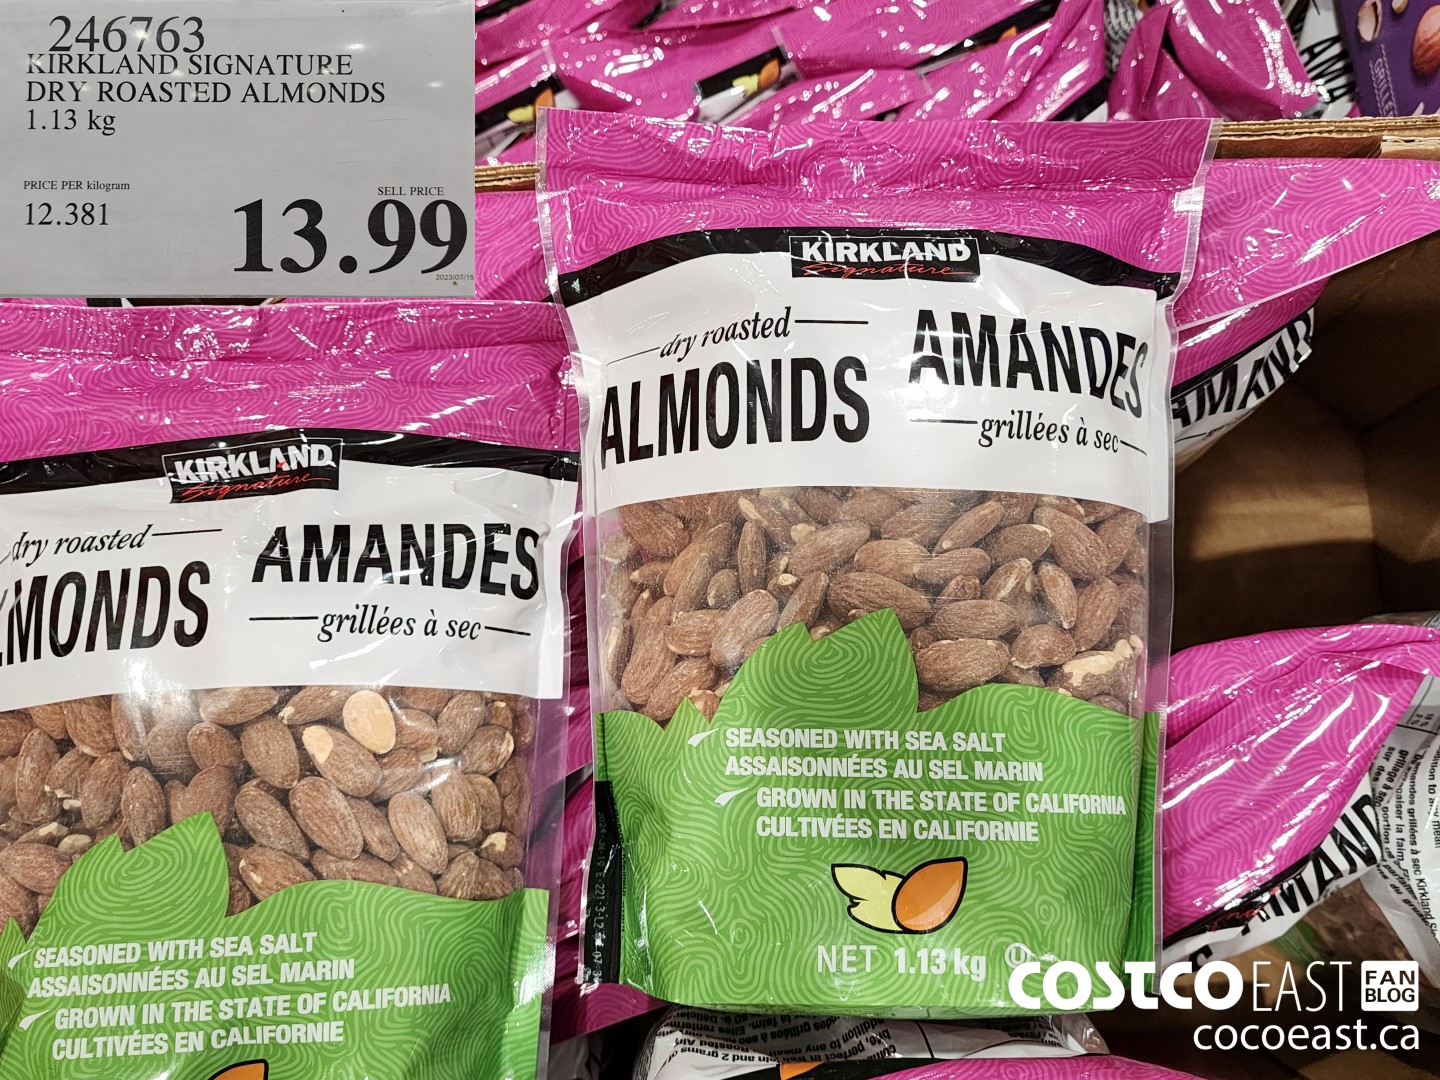 Costco East Snacks, nuts & protein Super Post Sept 21st 2023